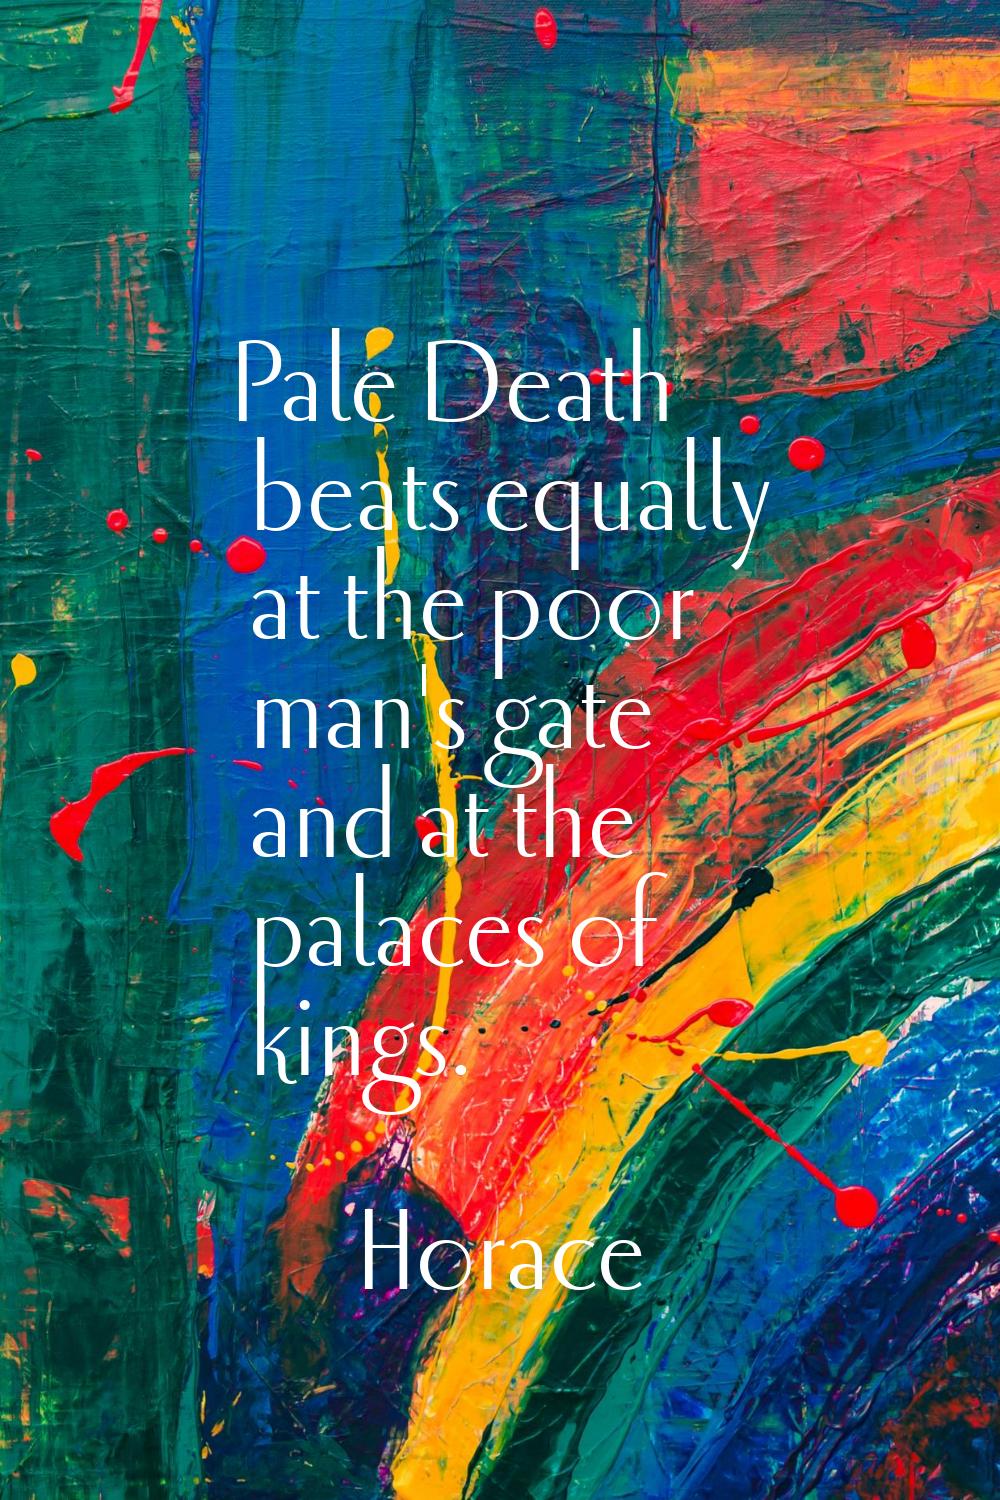 Pale Death beats equally at the poor man's gate and at the palaces of kings.